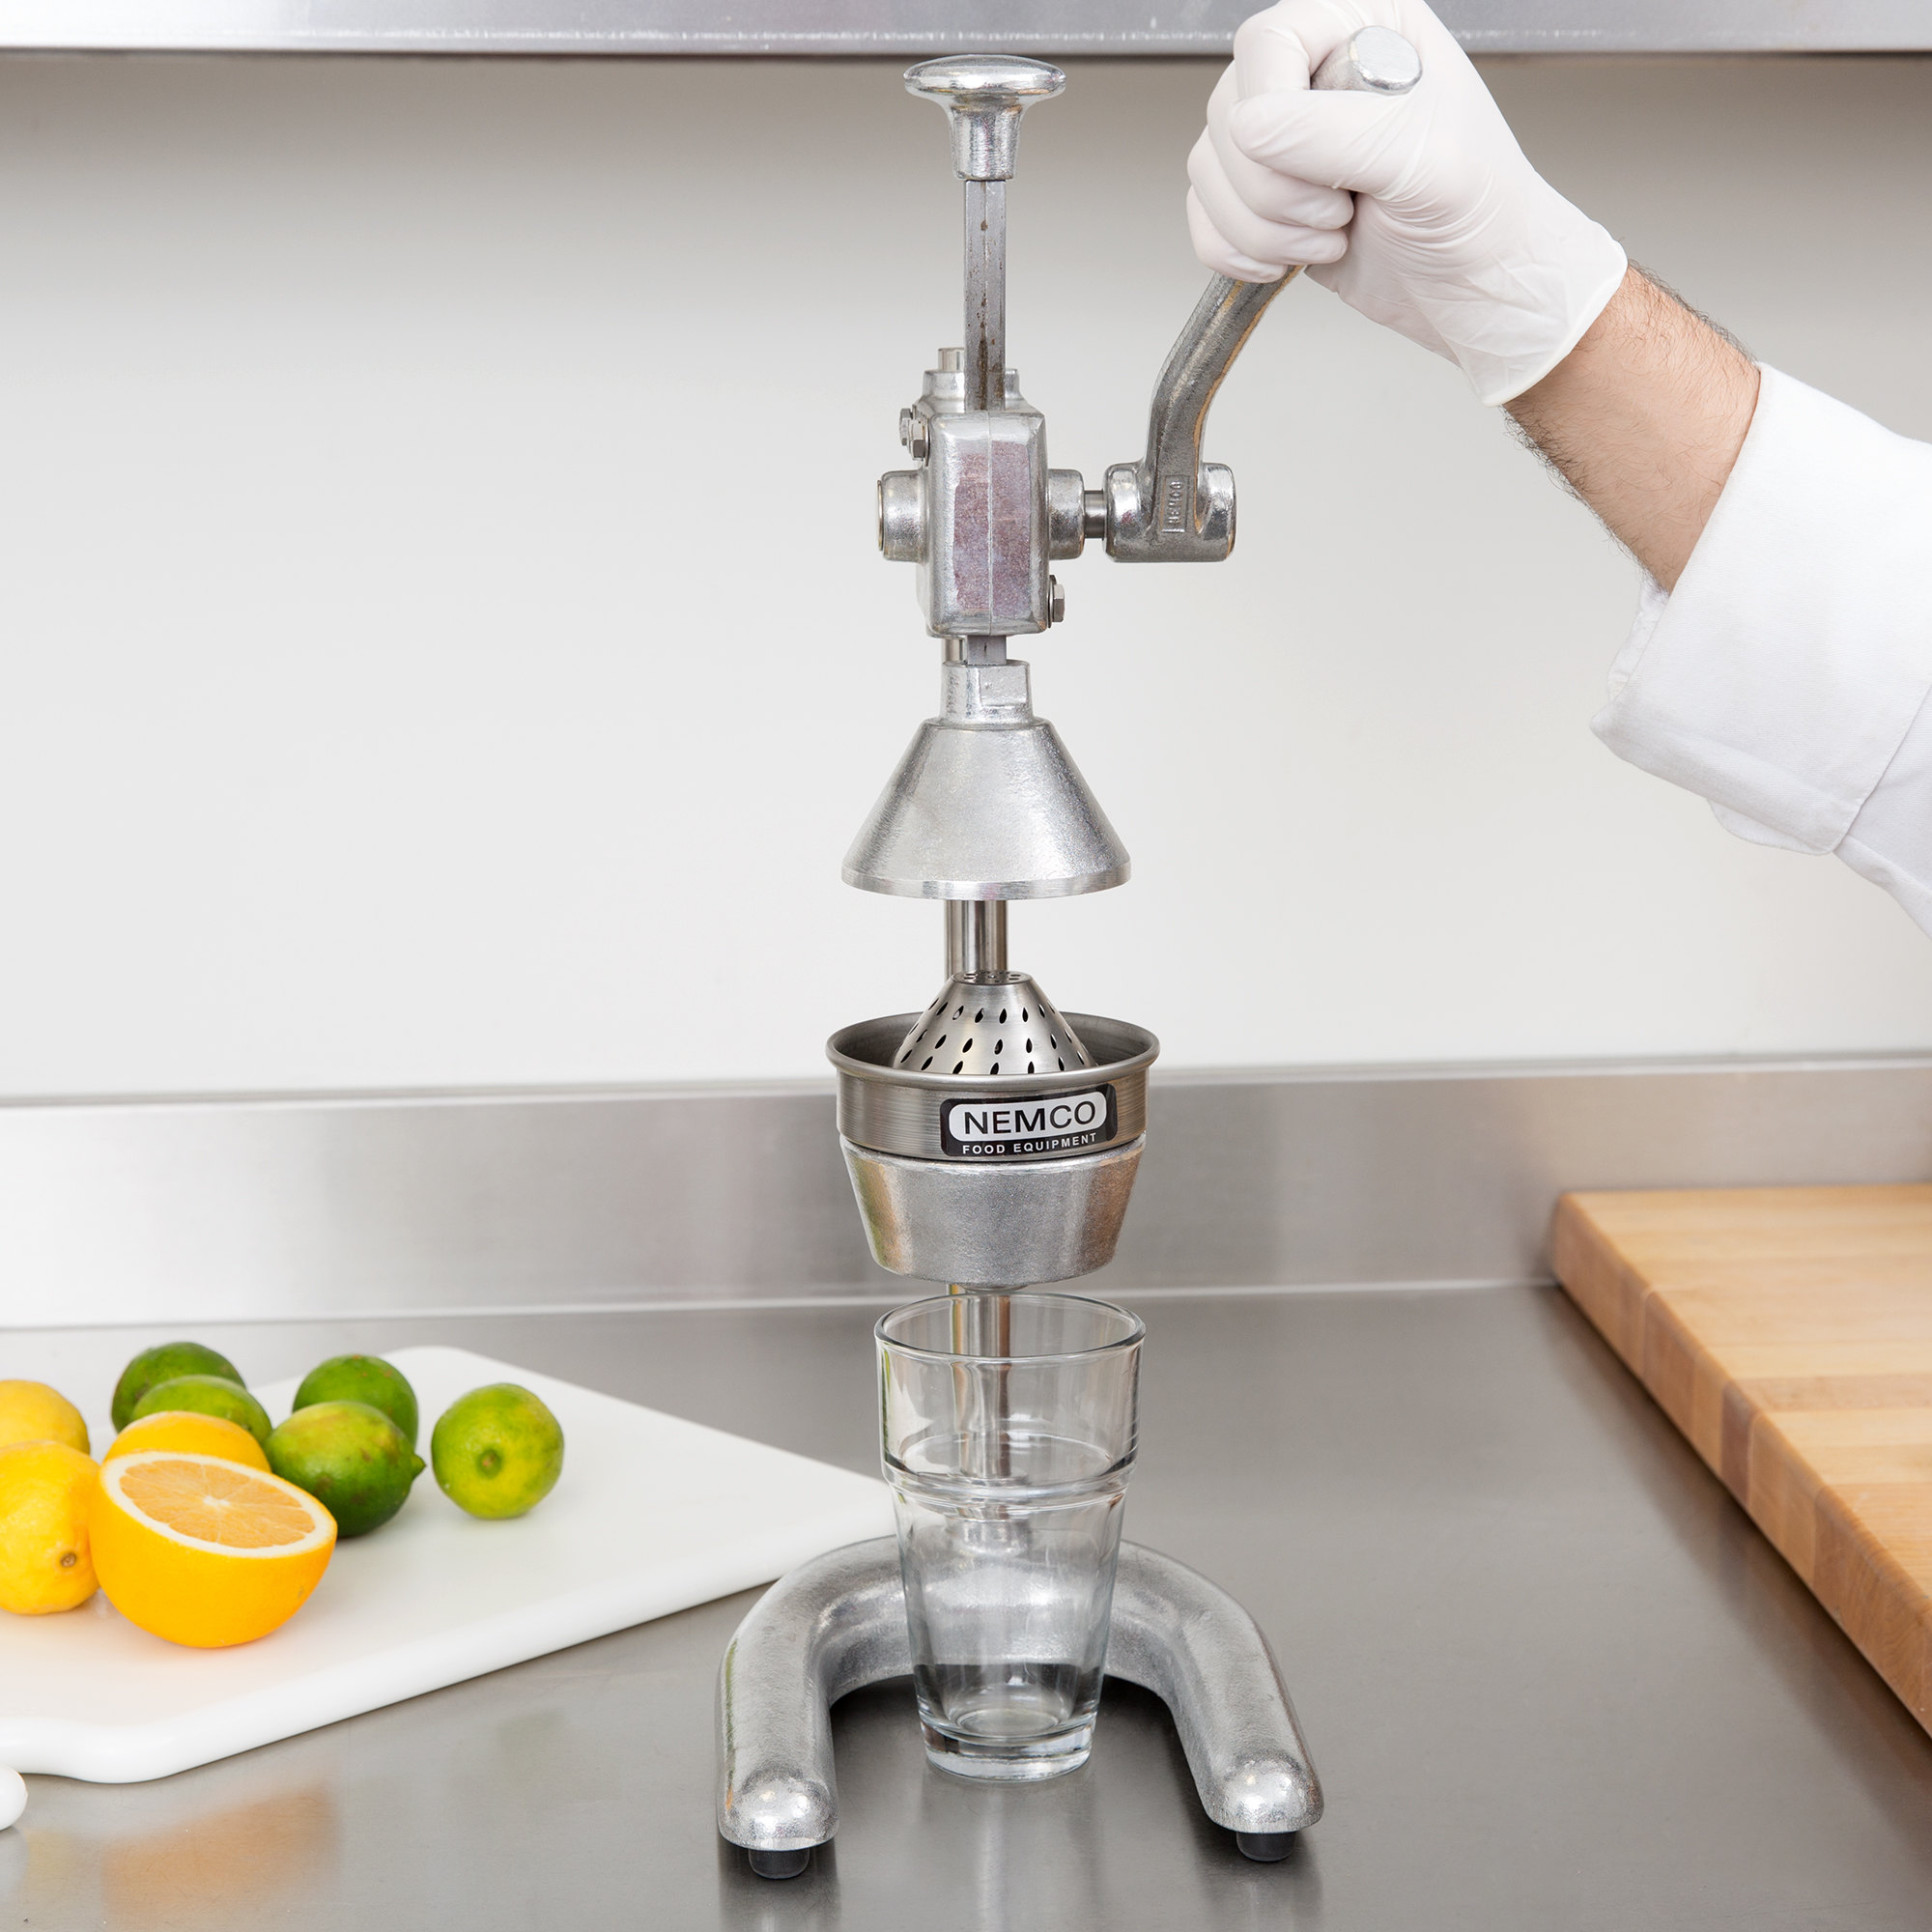 How To Use A Manual Juicer